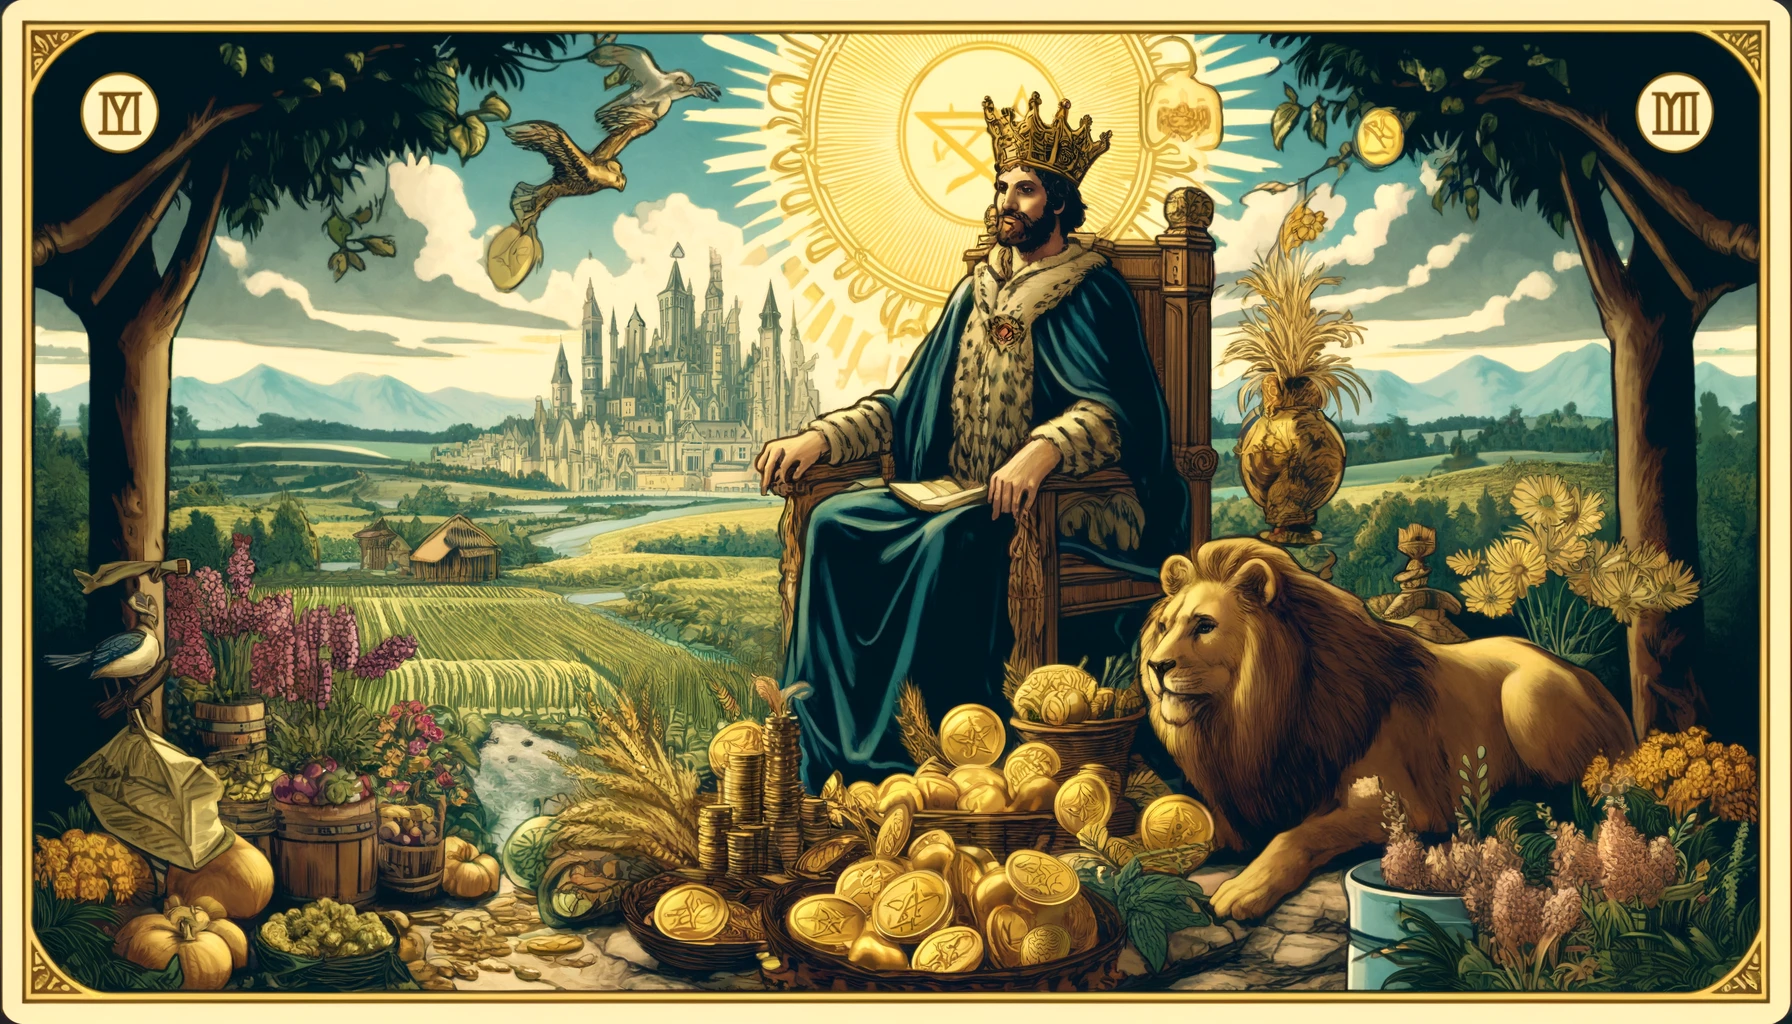 The illustration depicts the King of Pentacles in a regal pose, surrounded by symbols of wealth and prosperity. His demeanor exudes confidence and authority, reflecting themes of stability and tangible success. In the background, scenes of real-world scenarios unfold, illustrating the King's influence and impact. This visual serves as an inspiring header, inviting readers to explore themes of wealth and achievement with optimism and determination.